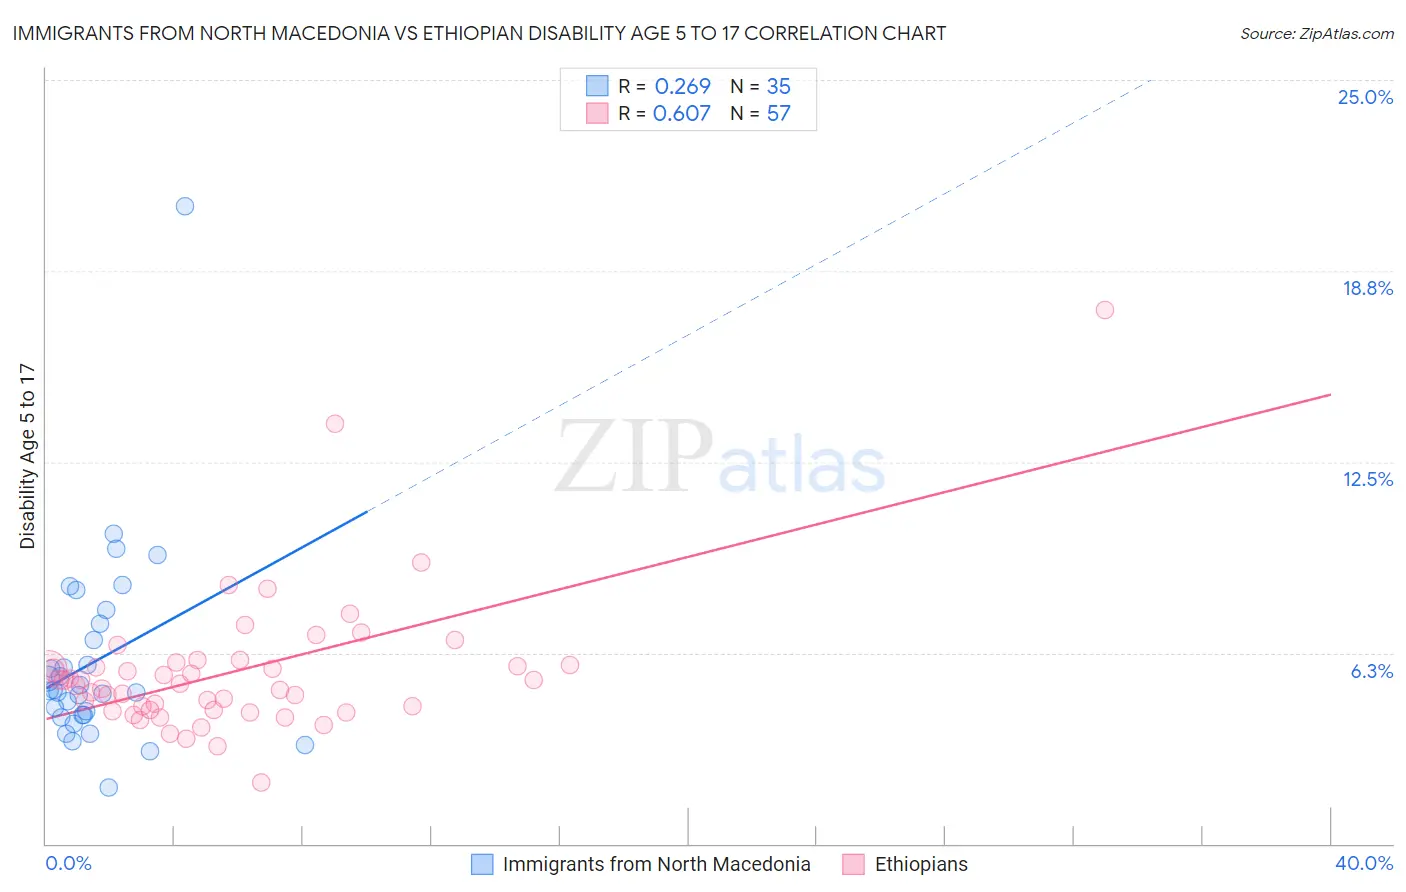 Immigrants from North Macedonia vs Ethiopian Disability Age 5 to 17